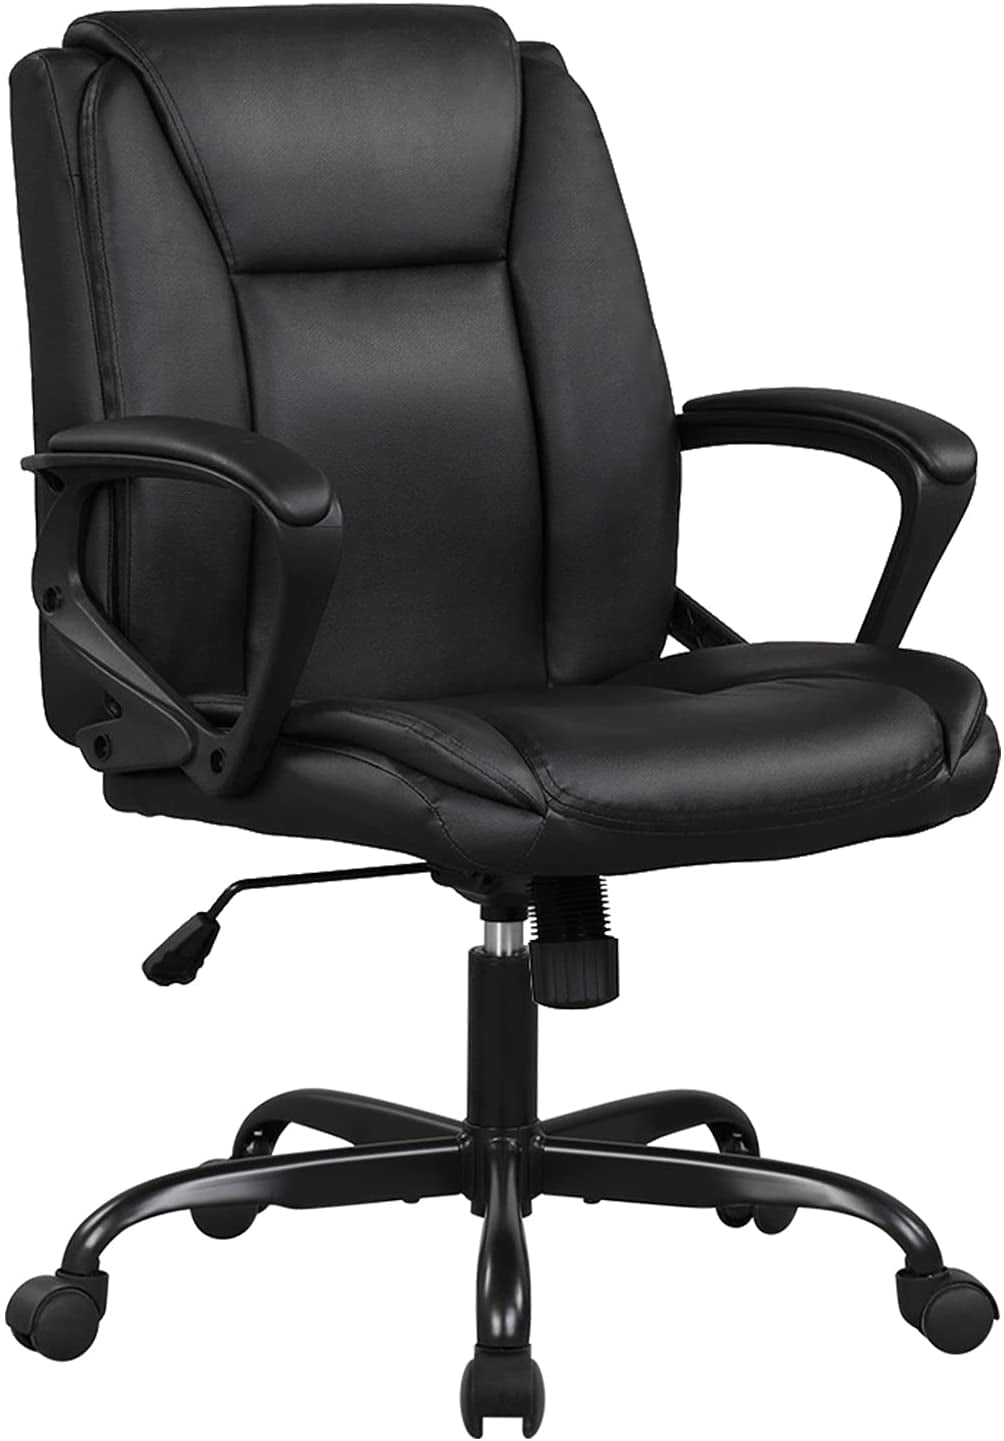 PU Leather Mesh High Back Comfortable  Office Chair Computer Desk Seating  Black 